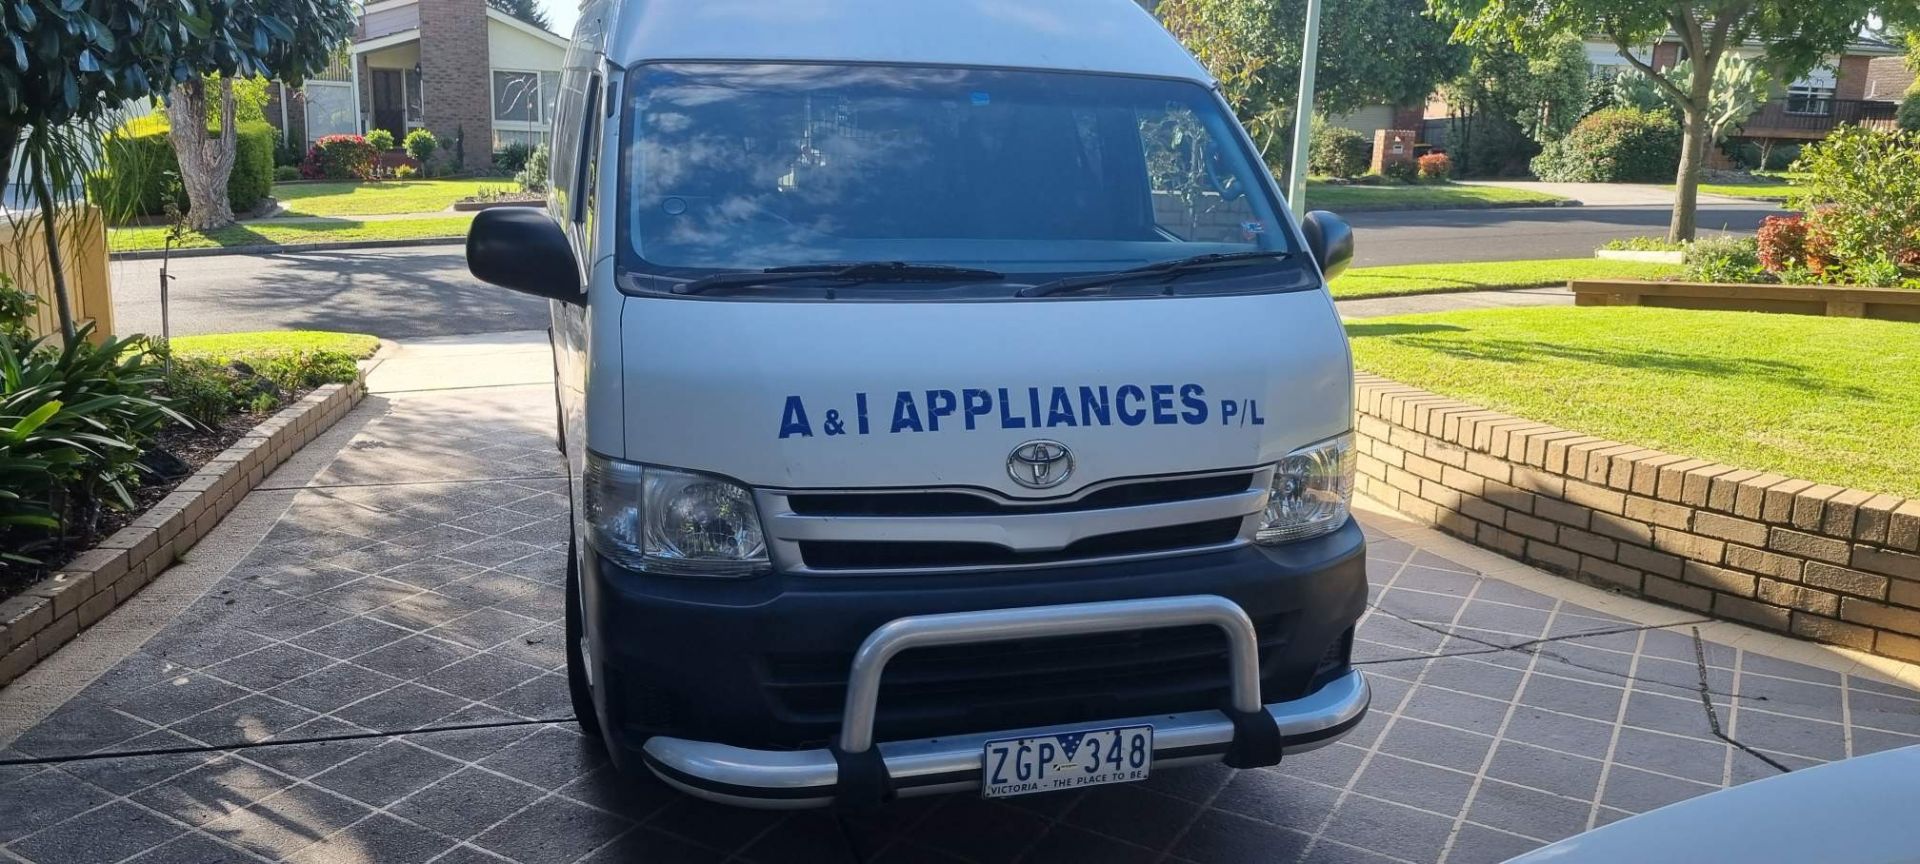 A & I AppliancesBusiness For Sale